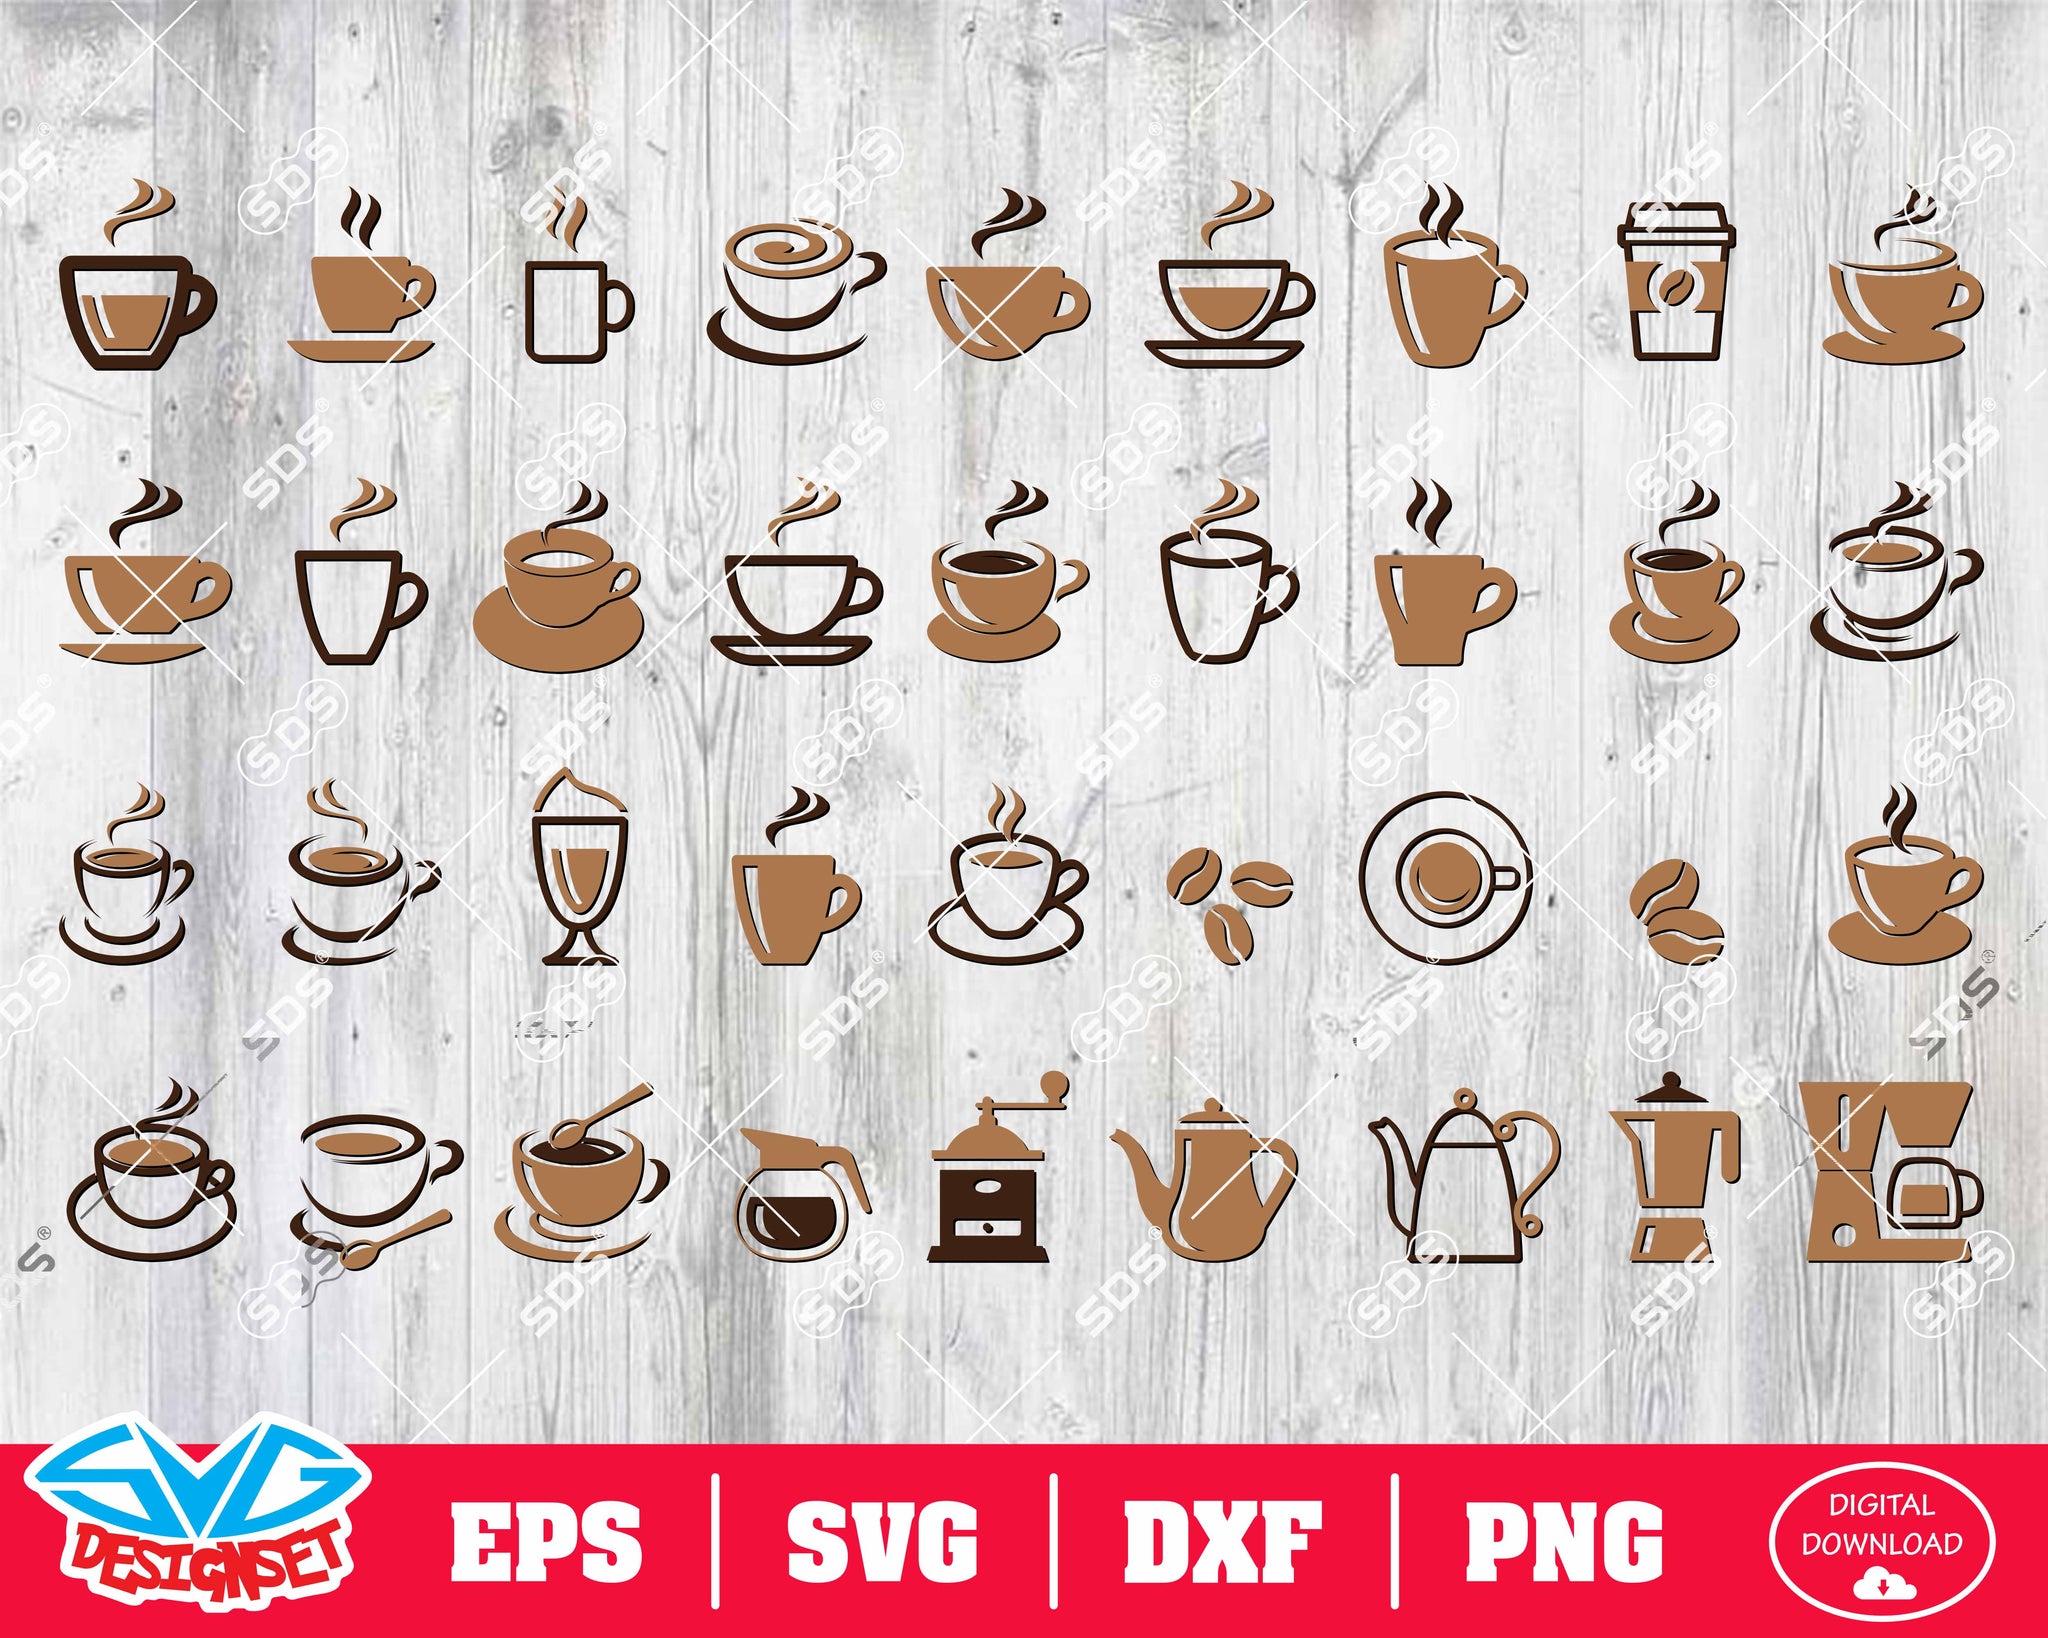 Coffee Svg, Dxf, Eps, Png, Clipart, Silhouette and Cutfiles #3 - SVGDesignSets